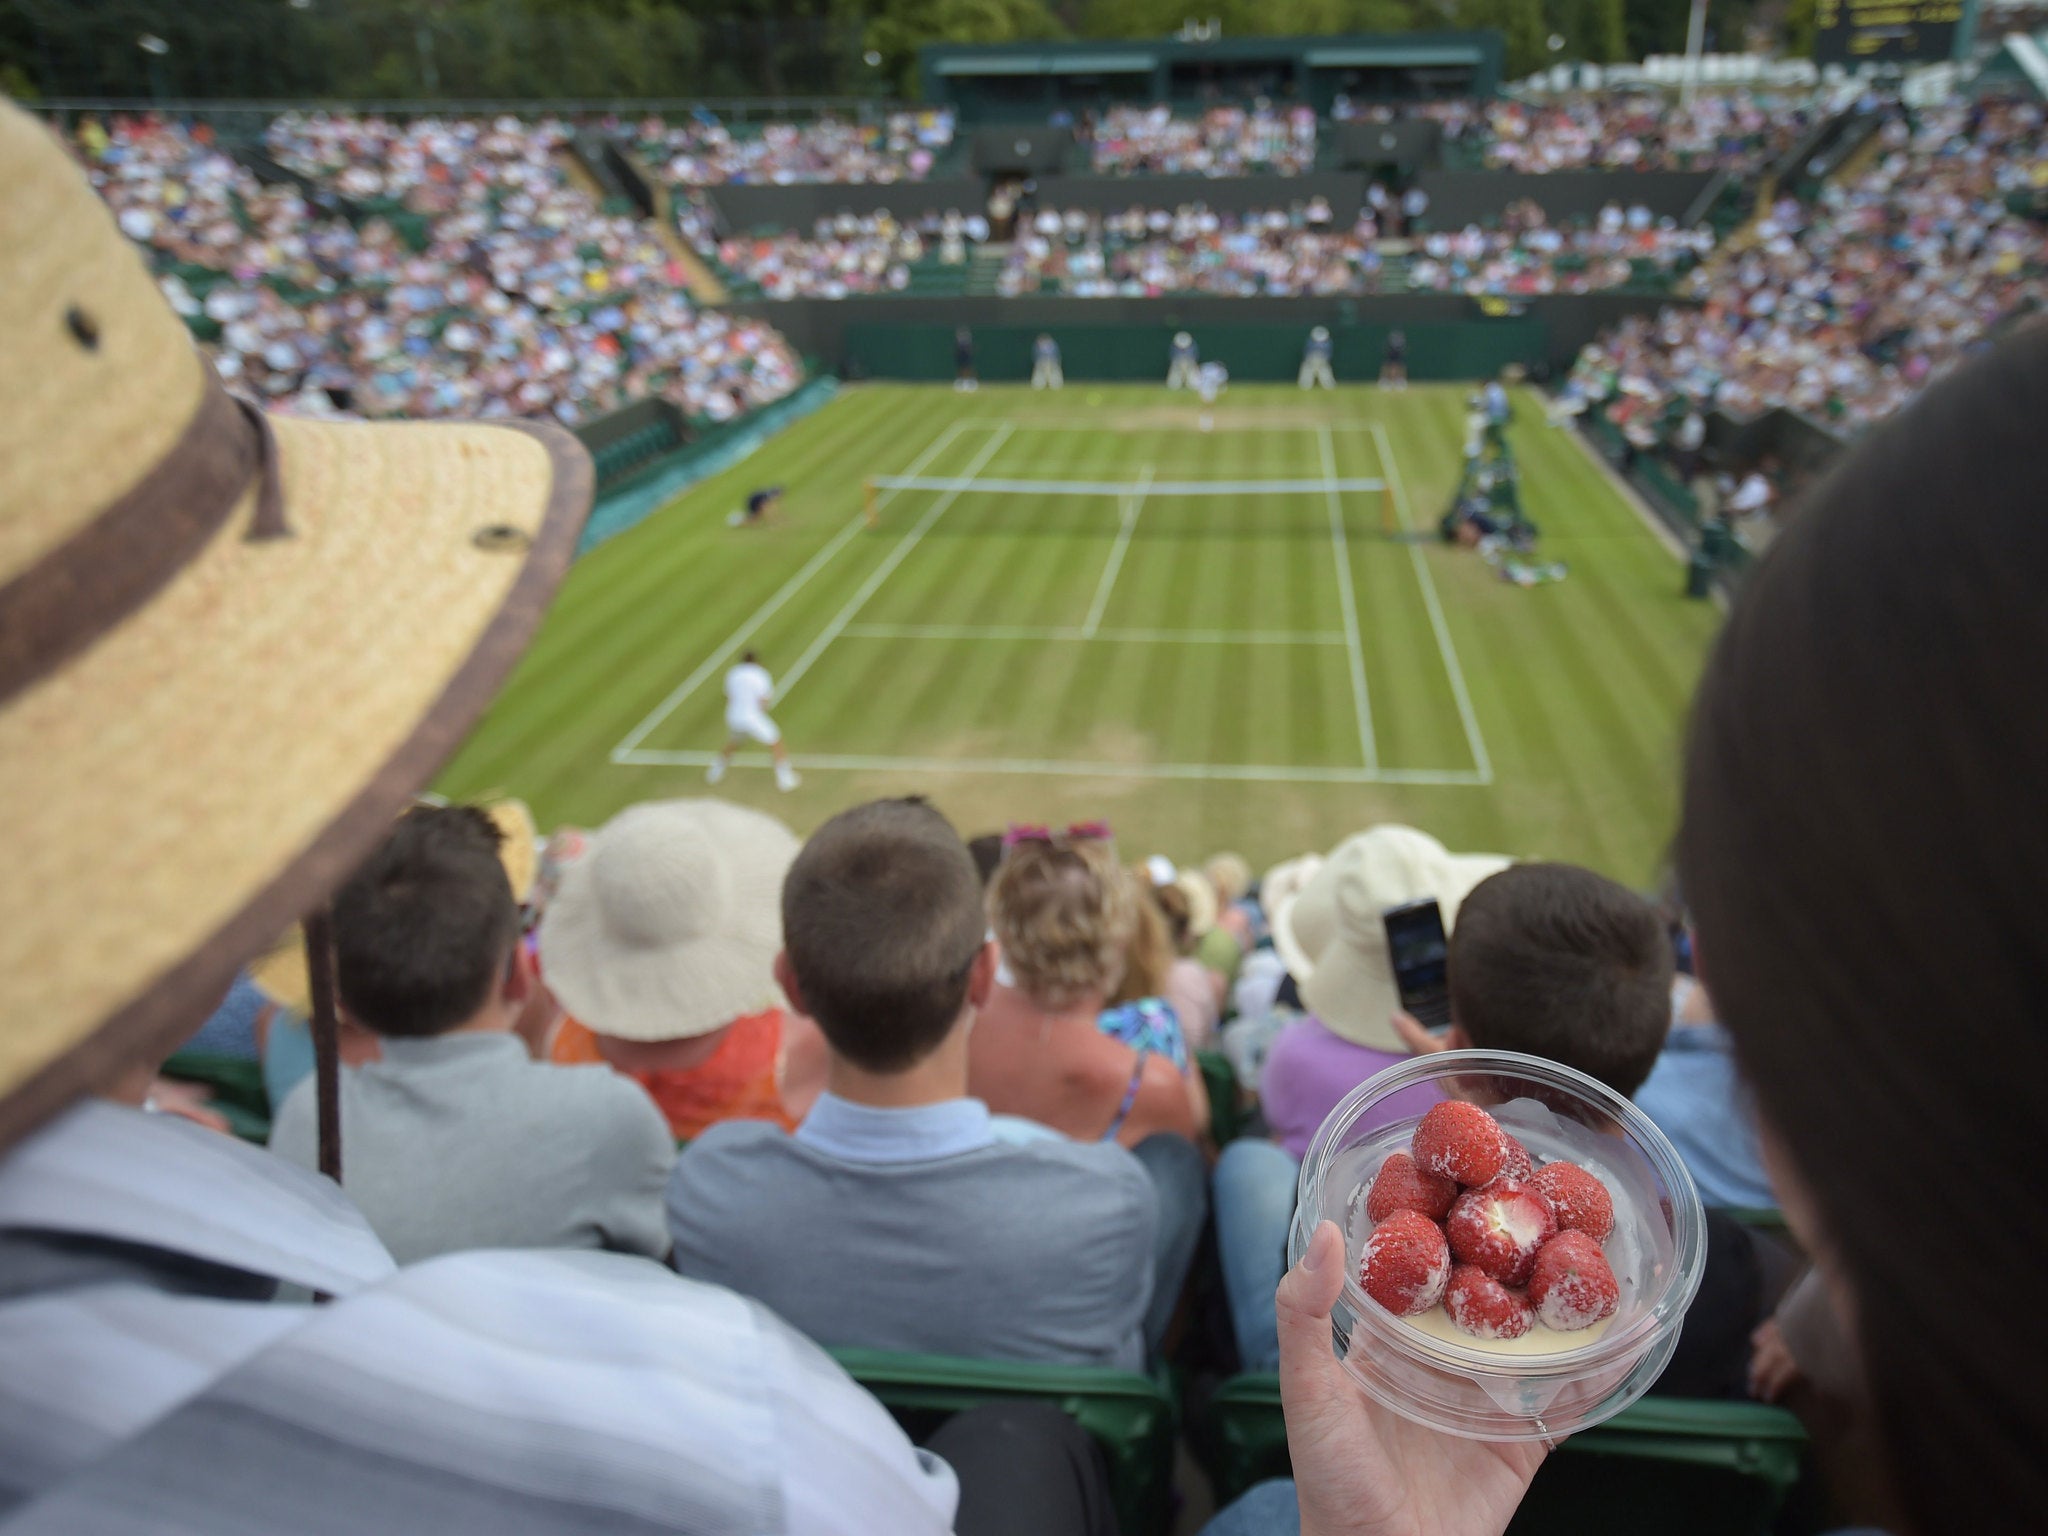 It's going to be a hot first week at Wimbledon